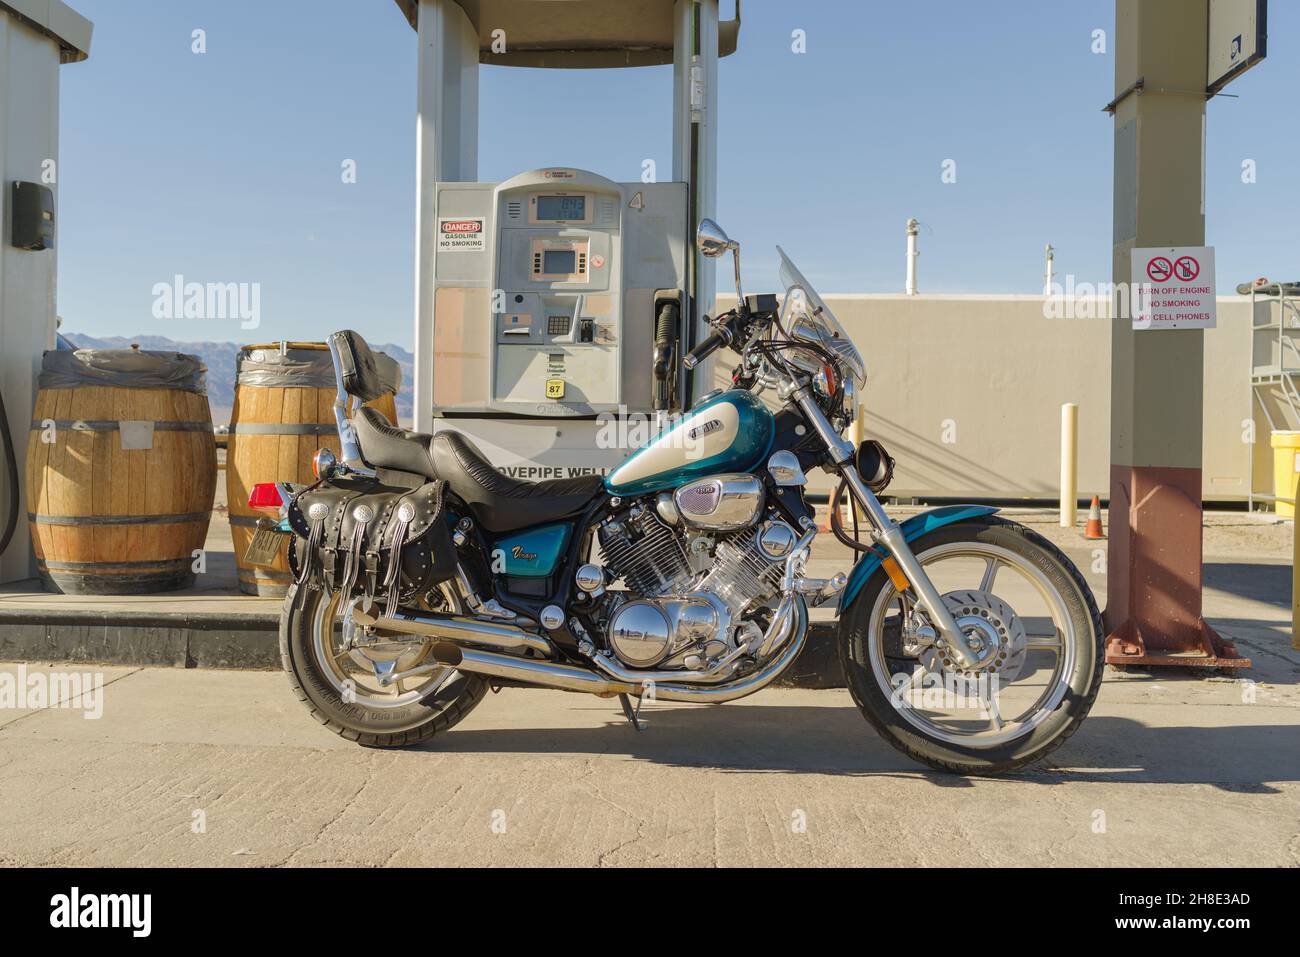 1994 Yamaha Virago motorcycle shown at a gas station in Stovepipe Well, Death Valley, California. Stock Photo